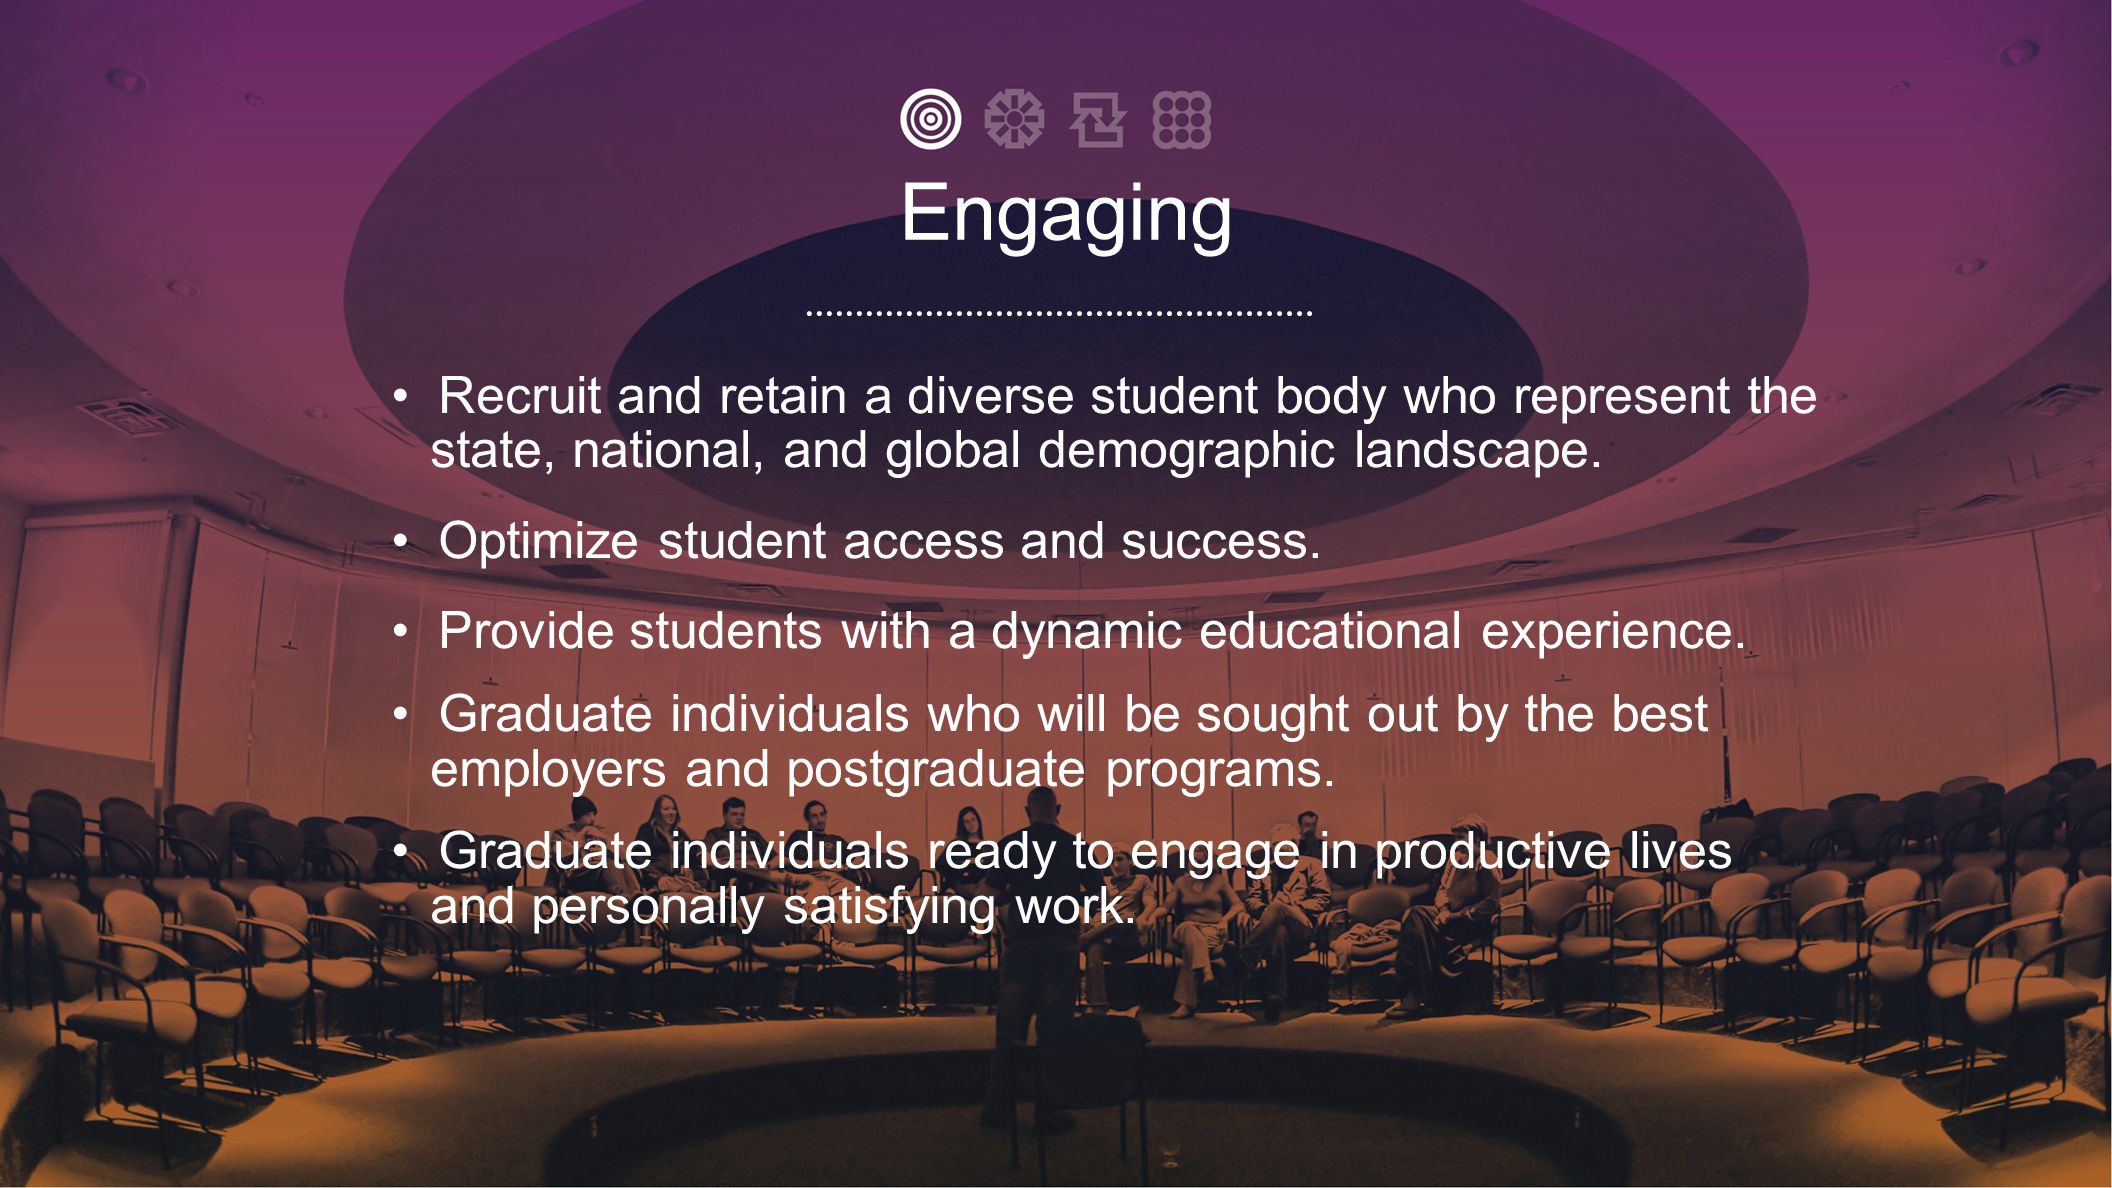 • Recruit and retain a diverse student body who represent the state, national, and global demographic landscape.